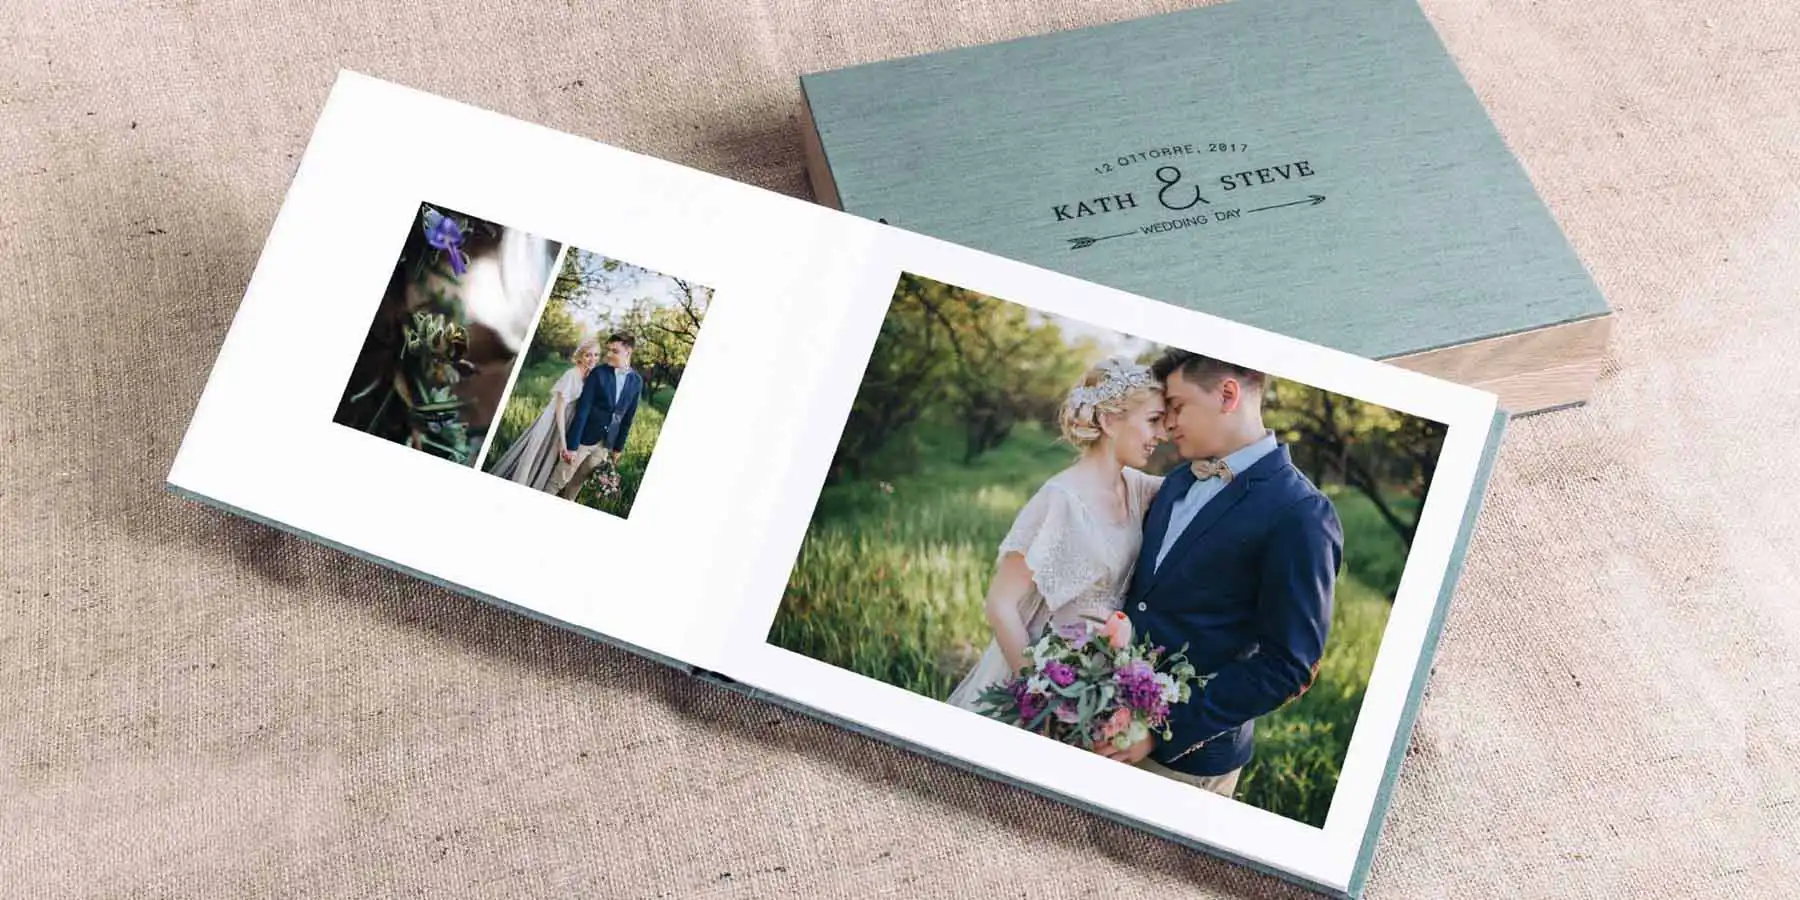 Luxury Italian Wedding Albums, from Photography by Simon